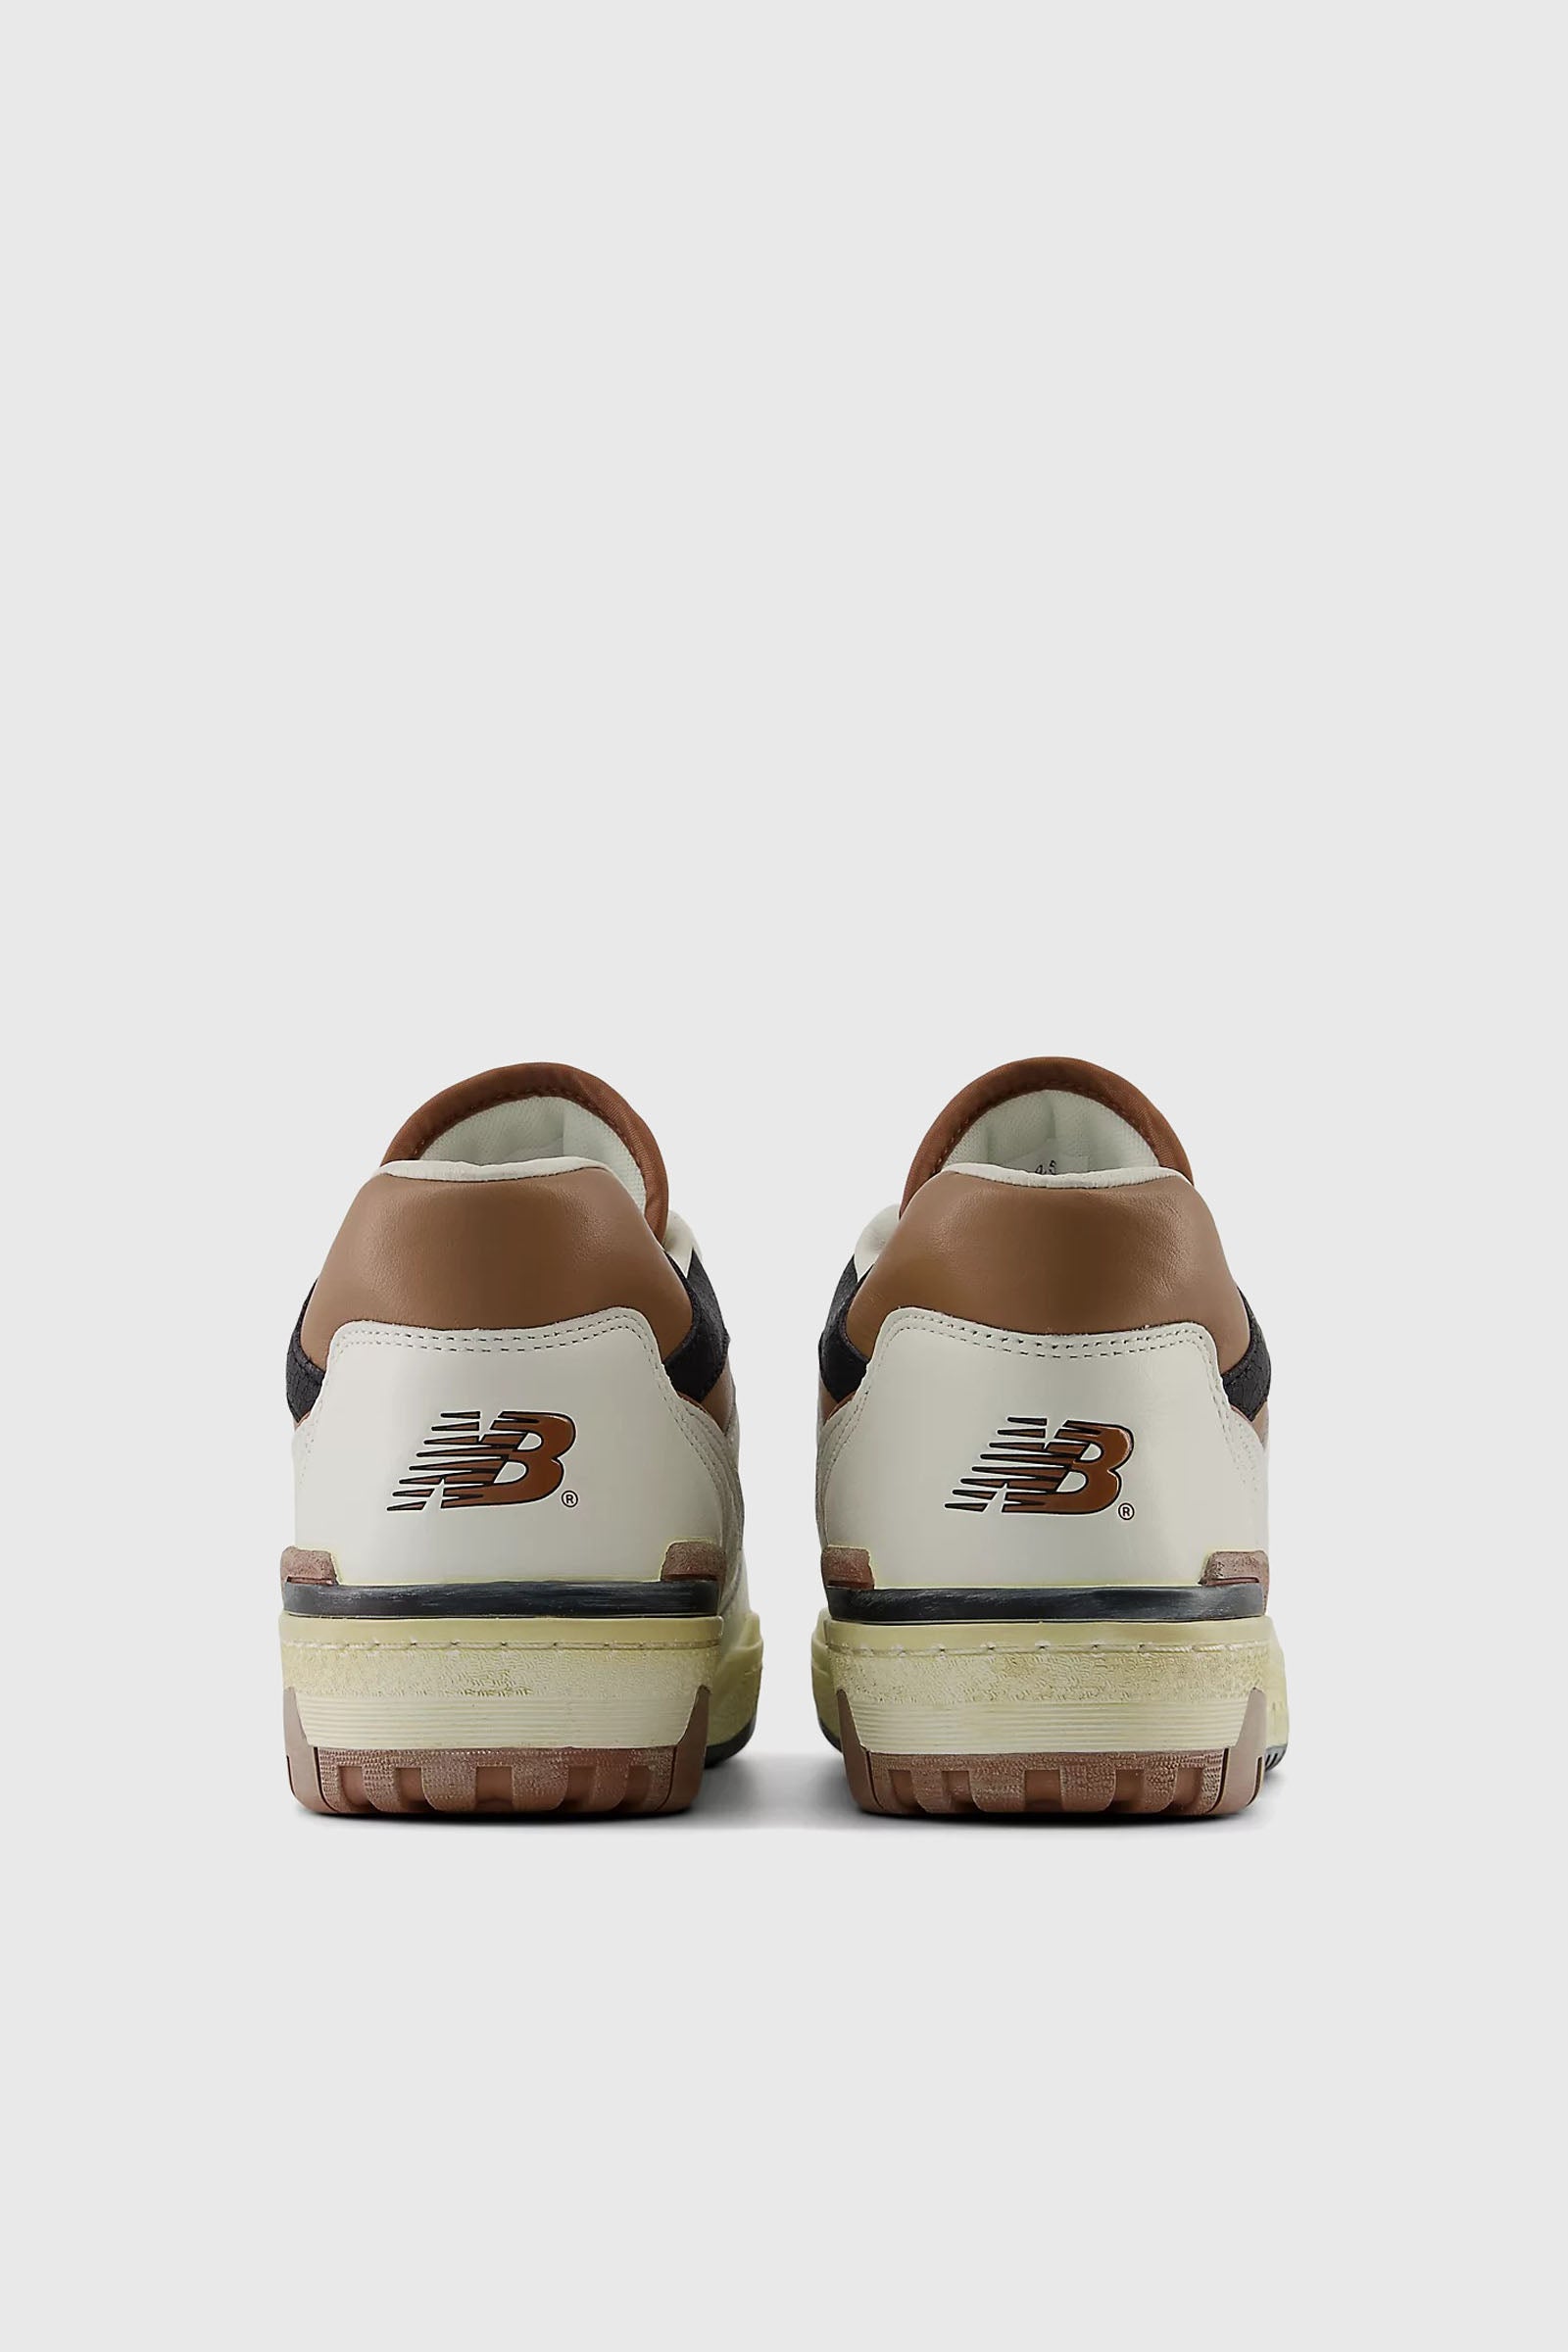 New Balance 550 Brown Synthetic Sneaker - 3